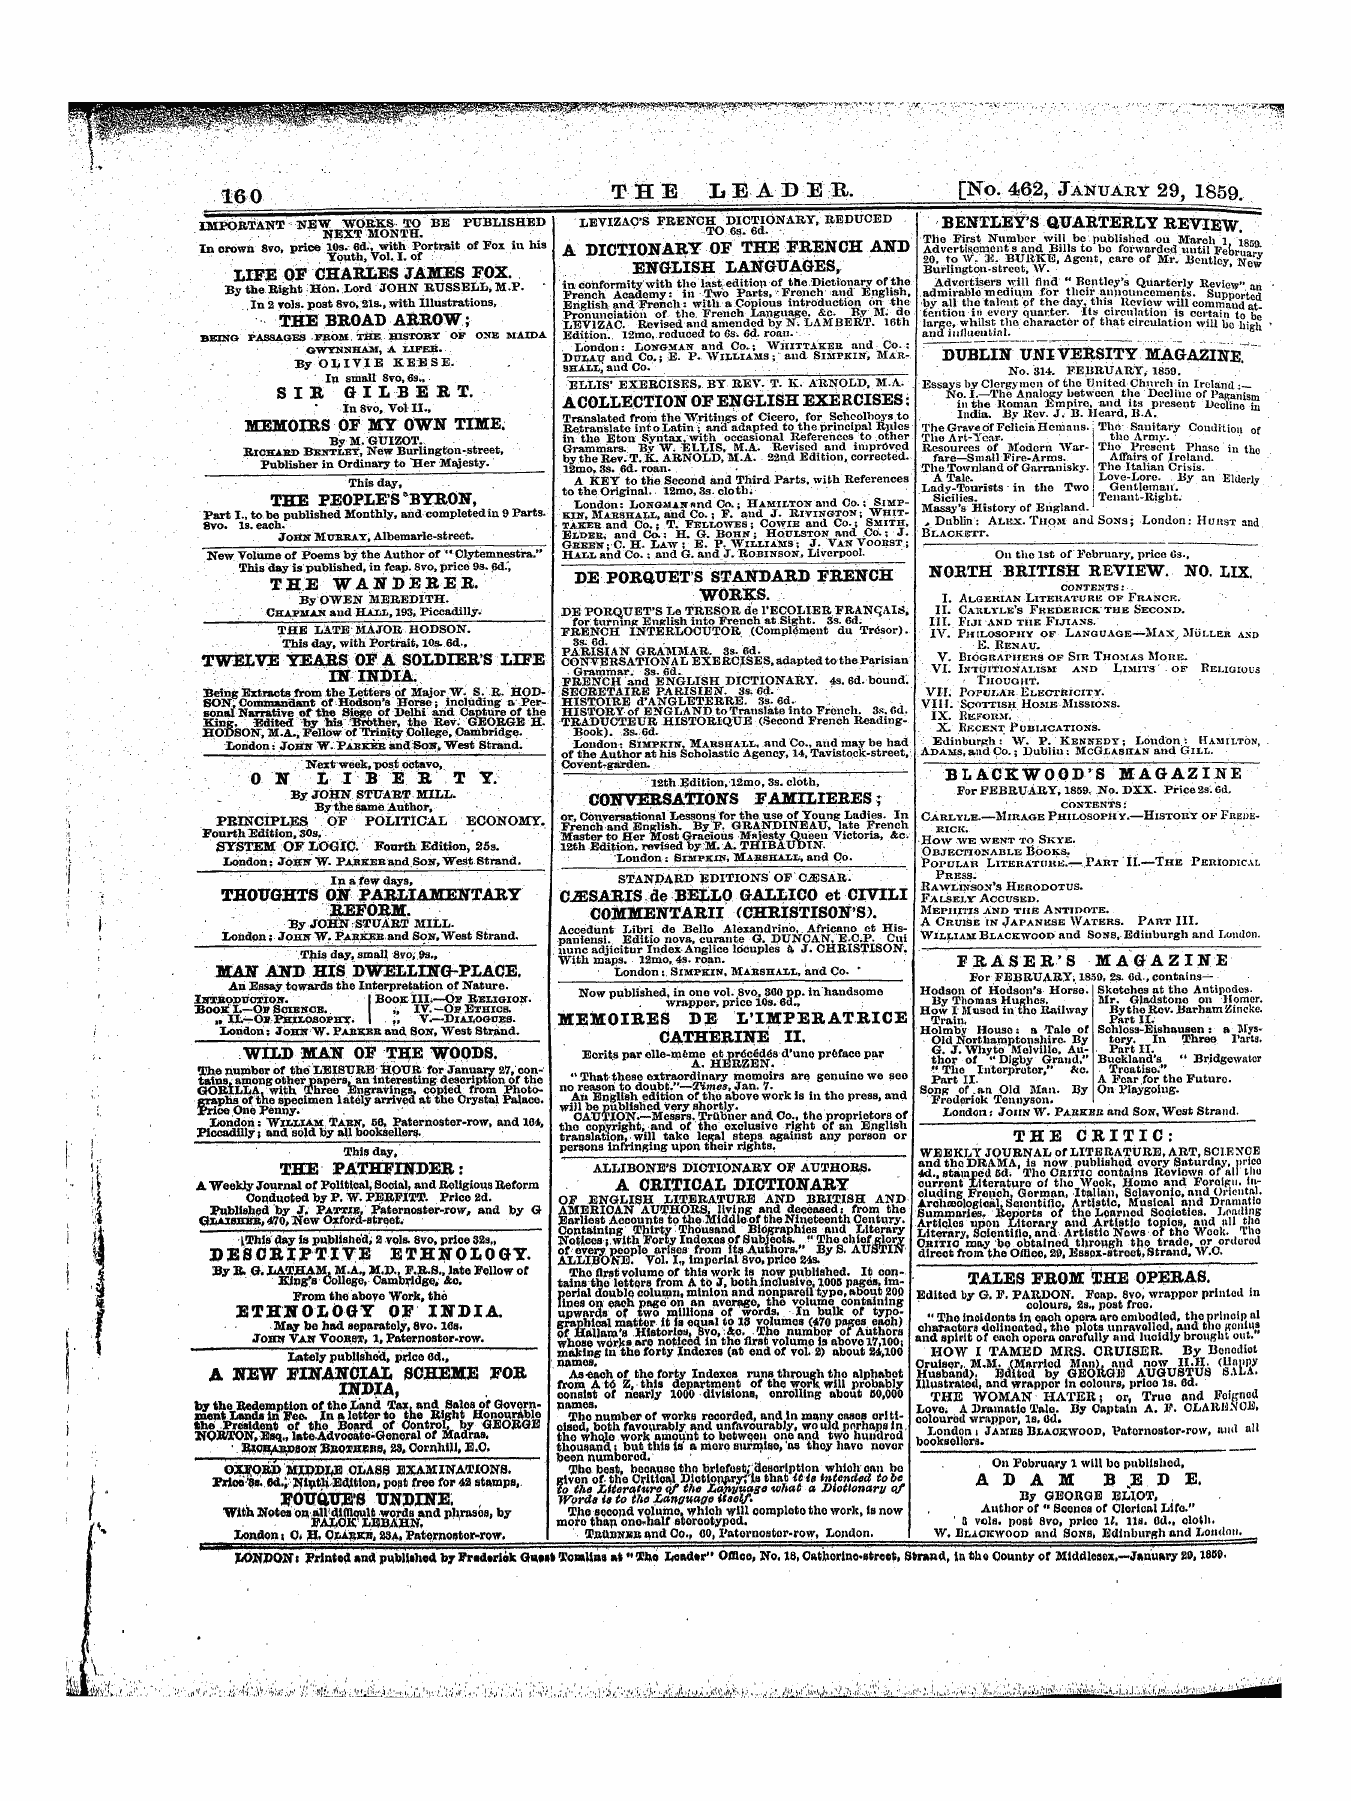 Leader (1850-1860): jS F Y, 1st edition: 32